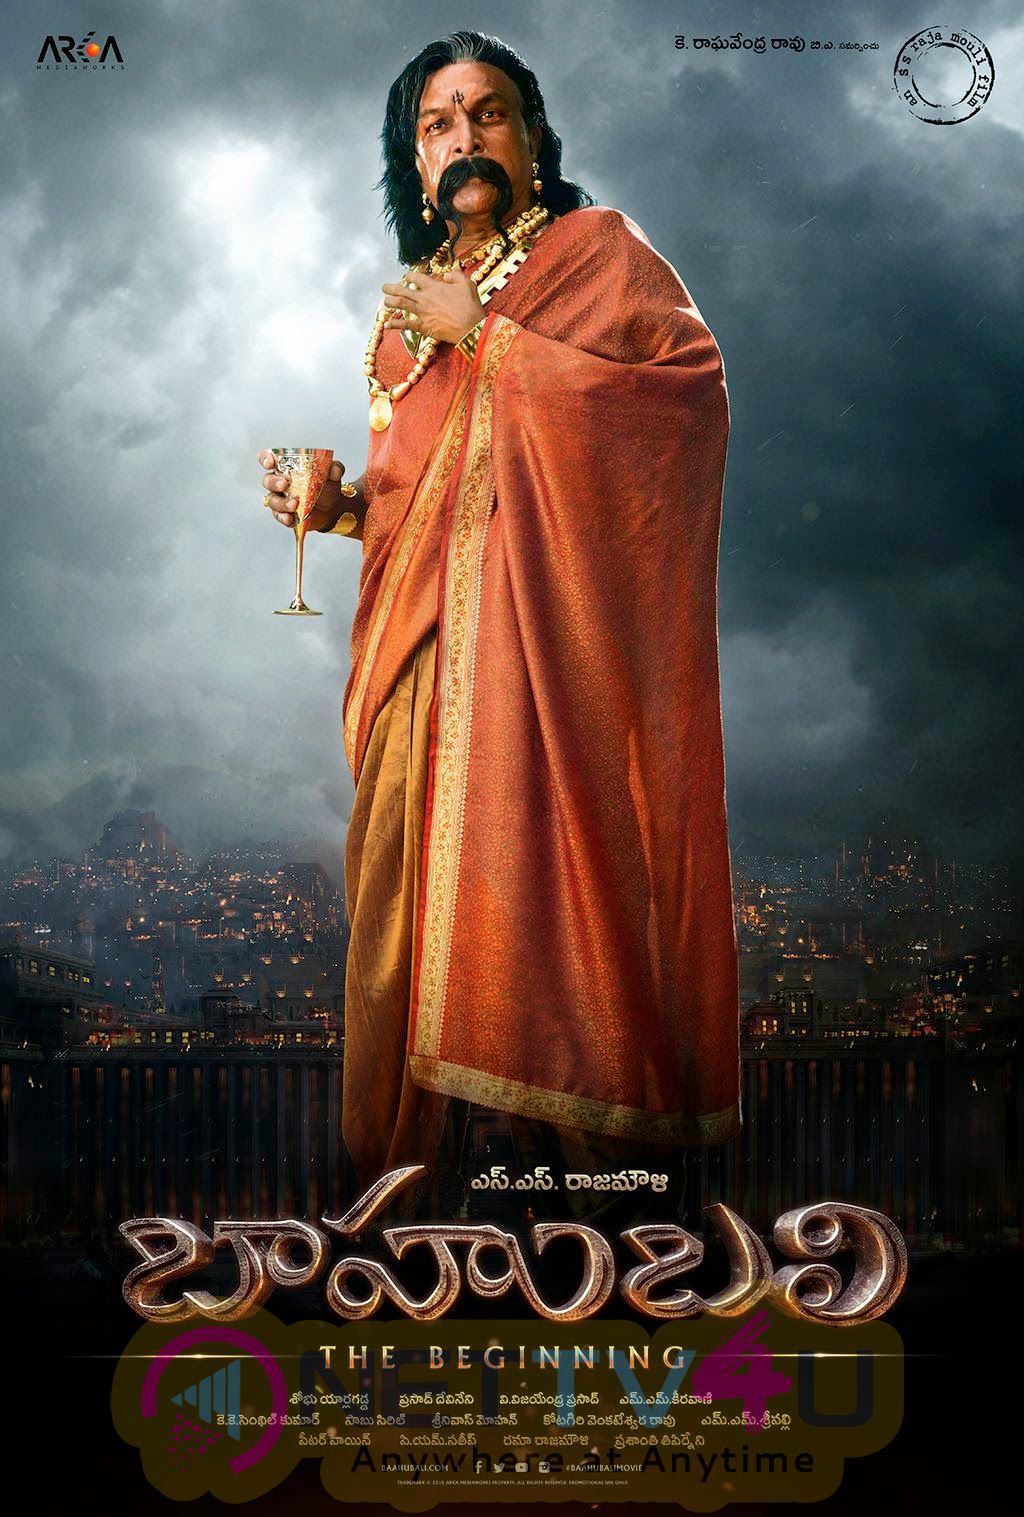 wallpapers and posters for baahubali telugu movie 30 days 10